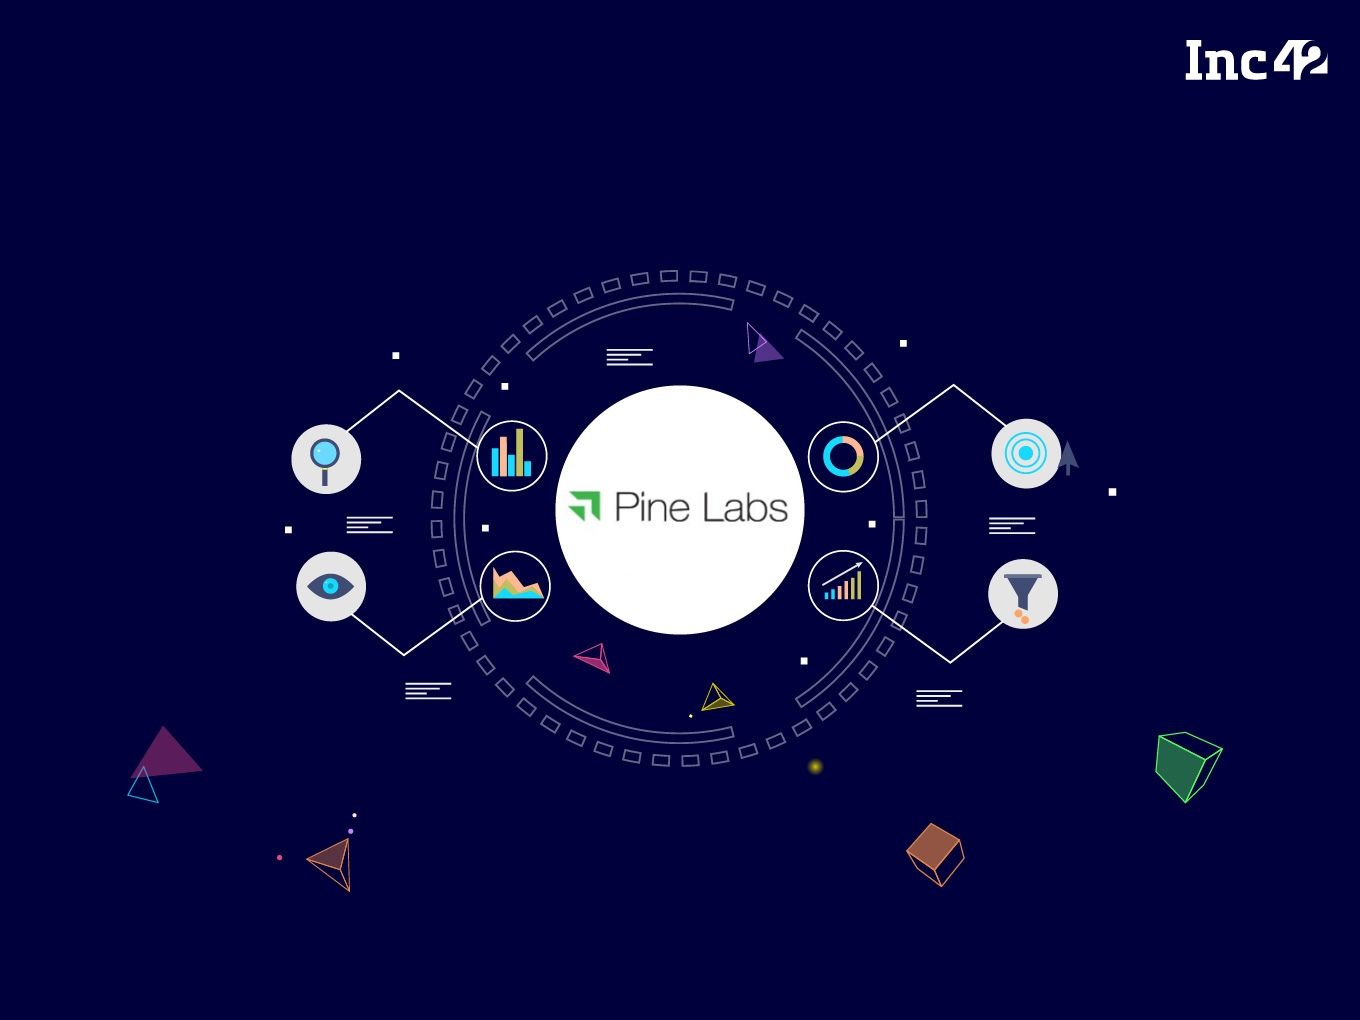 Pine Labs Suffers 4.46X Higher Losses With IPO On The Horizon